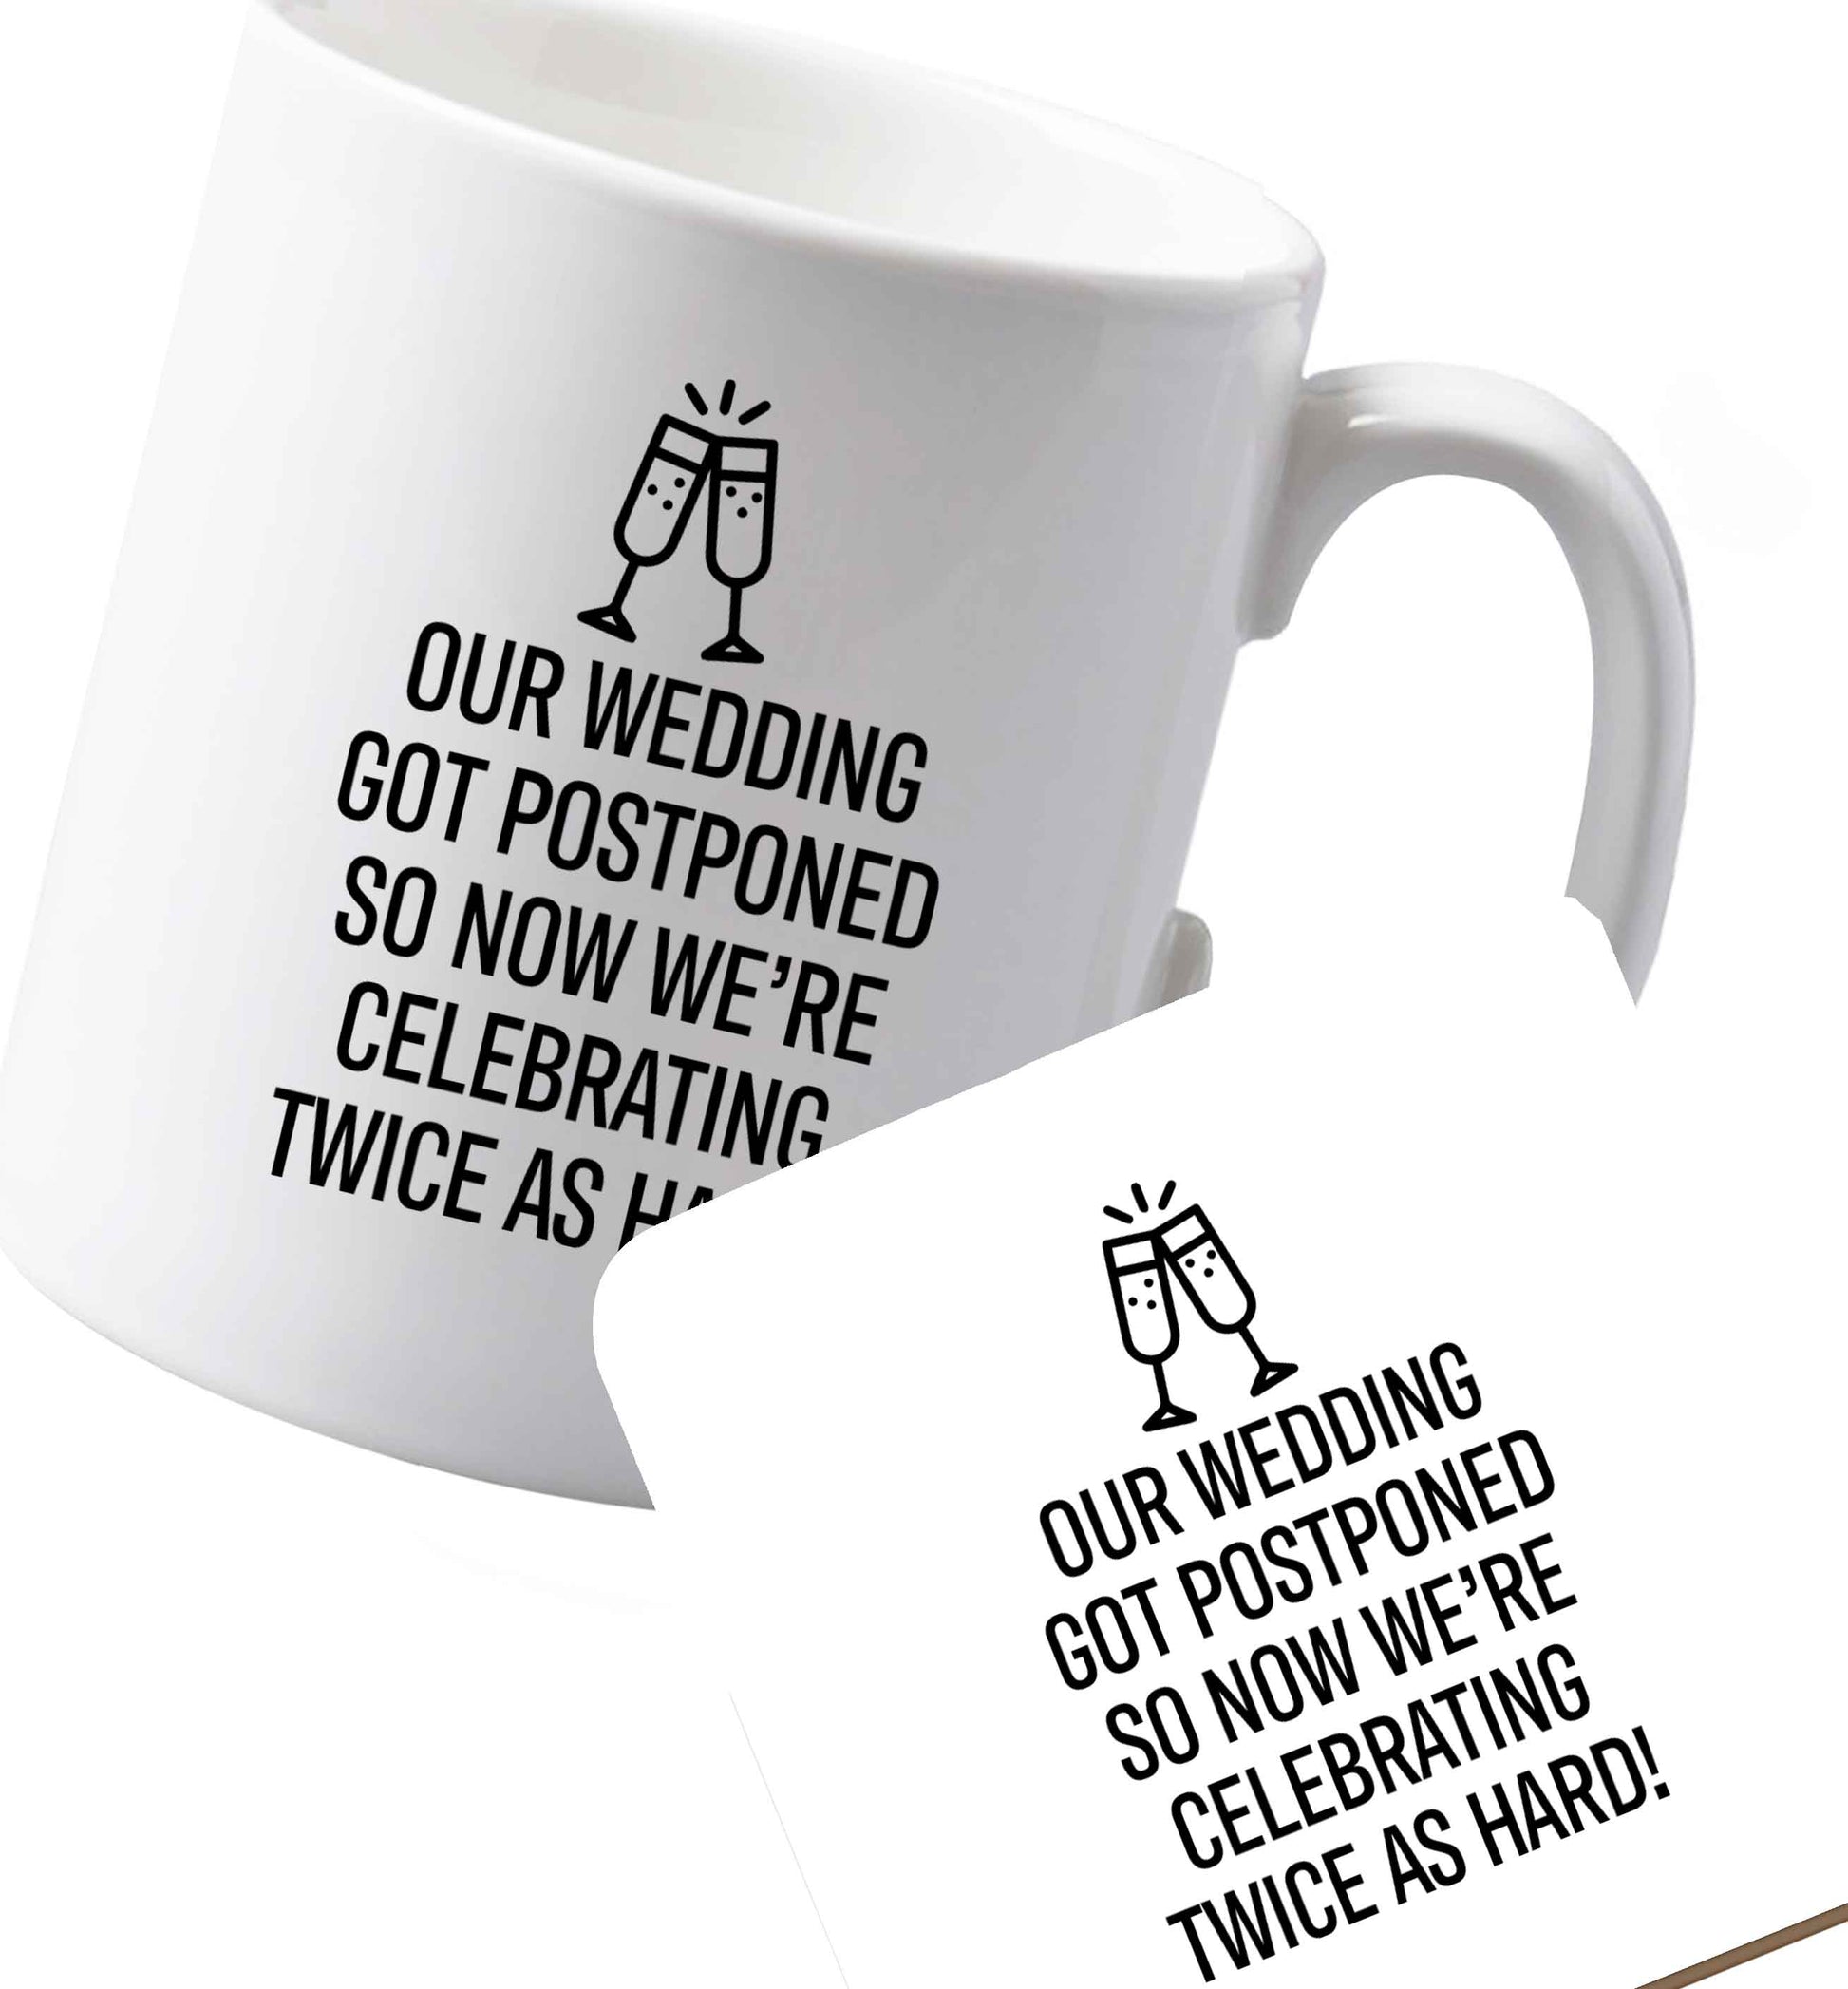 10 oz Ceramic mug and coaster Postponed wedding? Sounds like an excuse to party twice as hard!    both sides